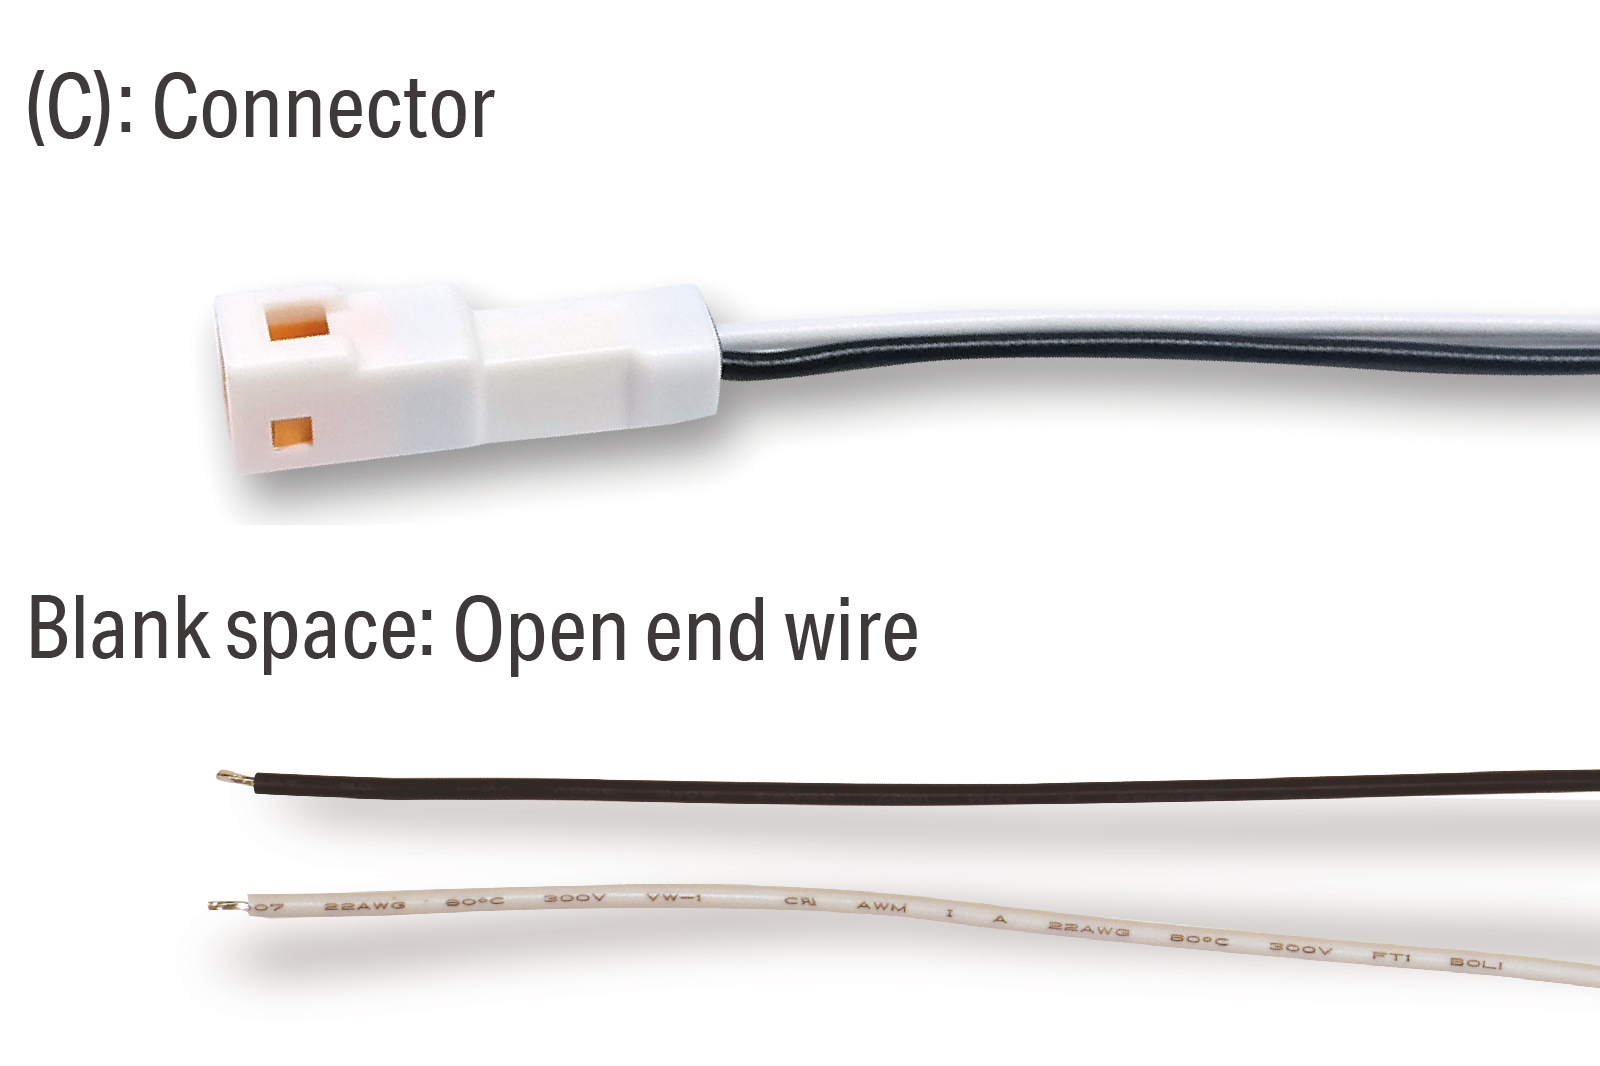 Lead wire option